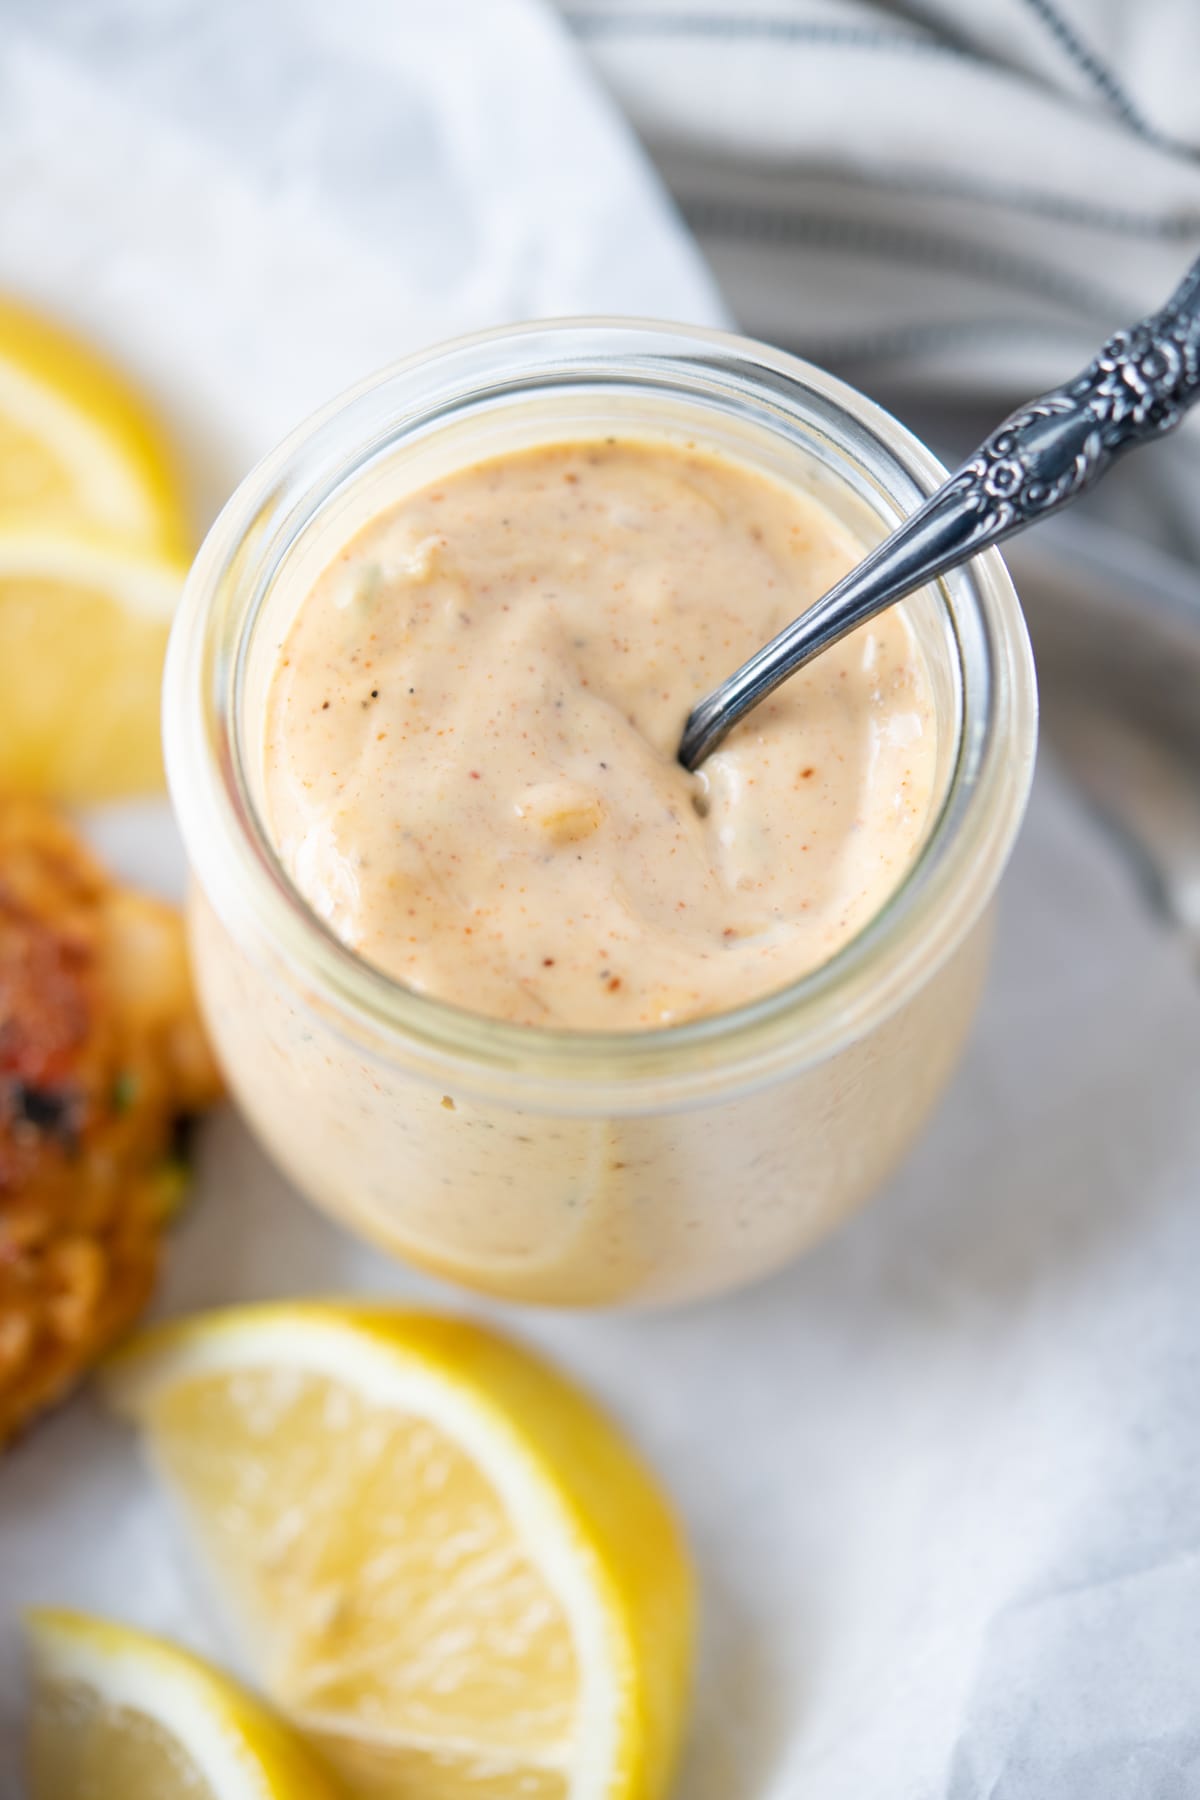 Remoulade sauce served with lemon and shrimp cakes